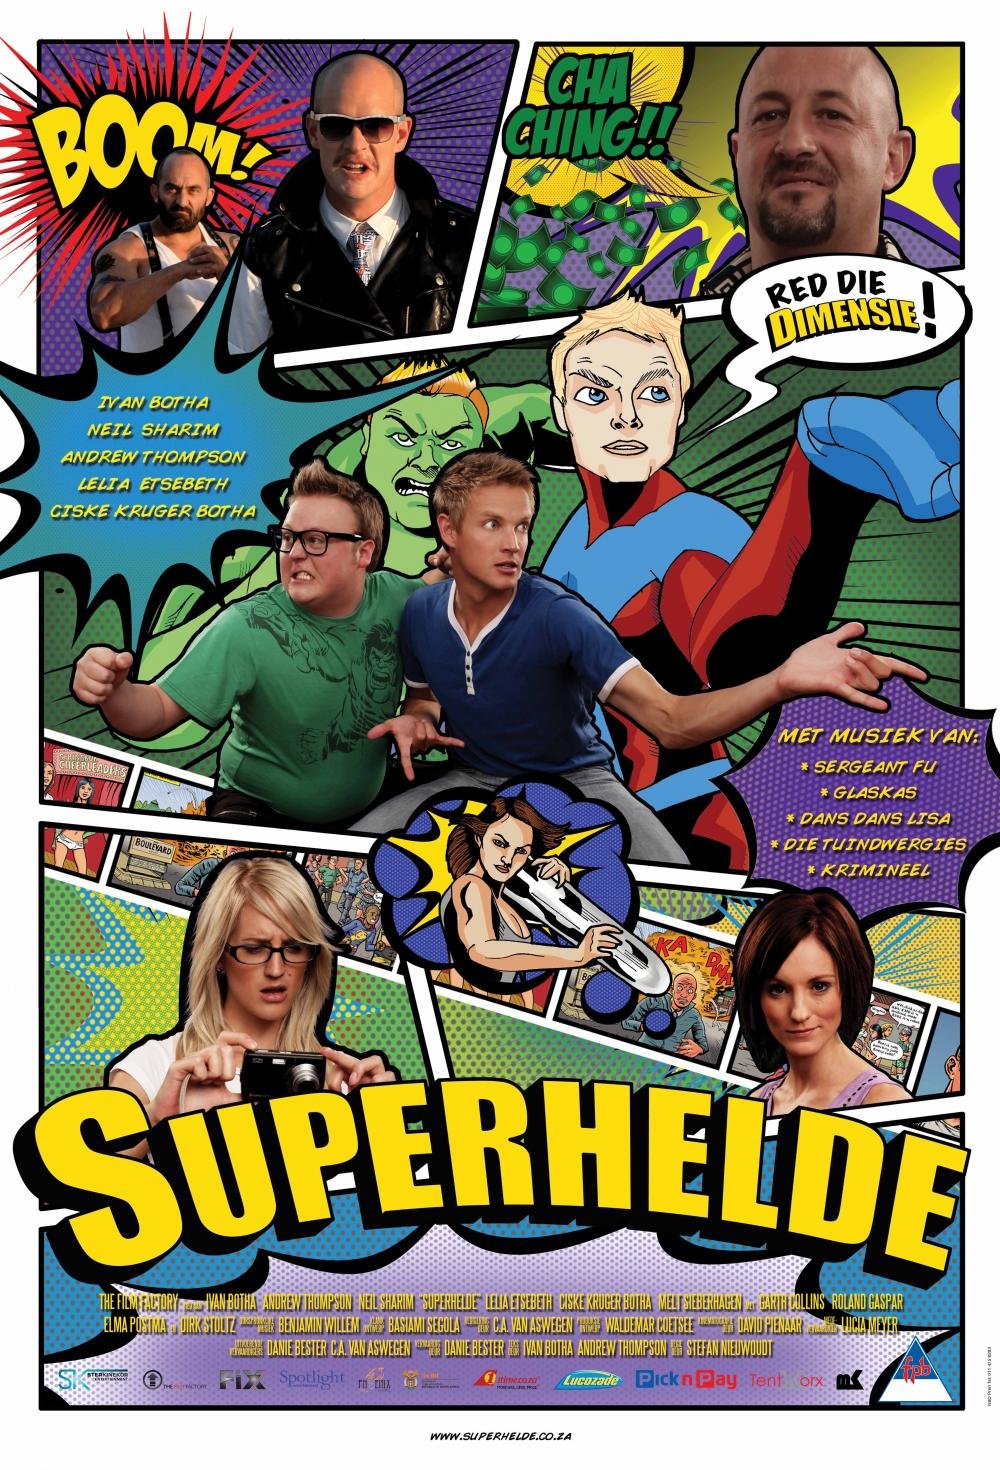 Extra Large Movie Poster Image for Superhelde 